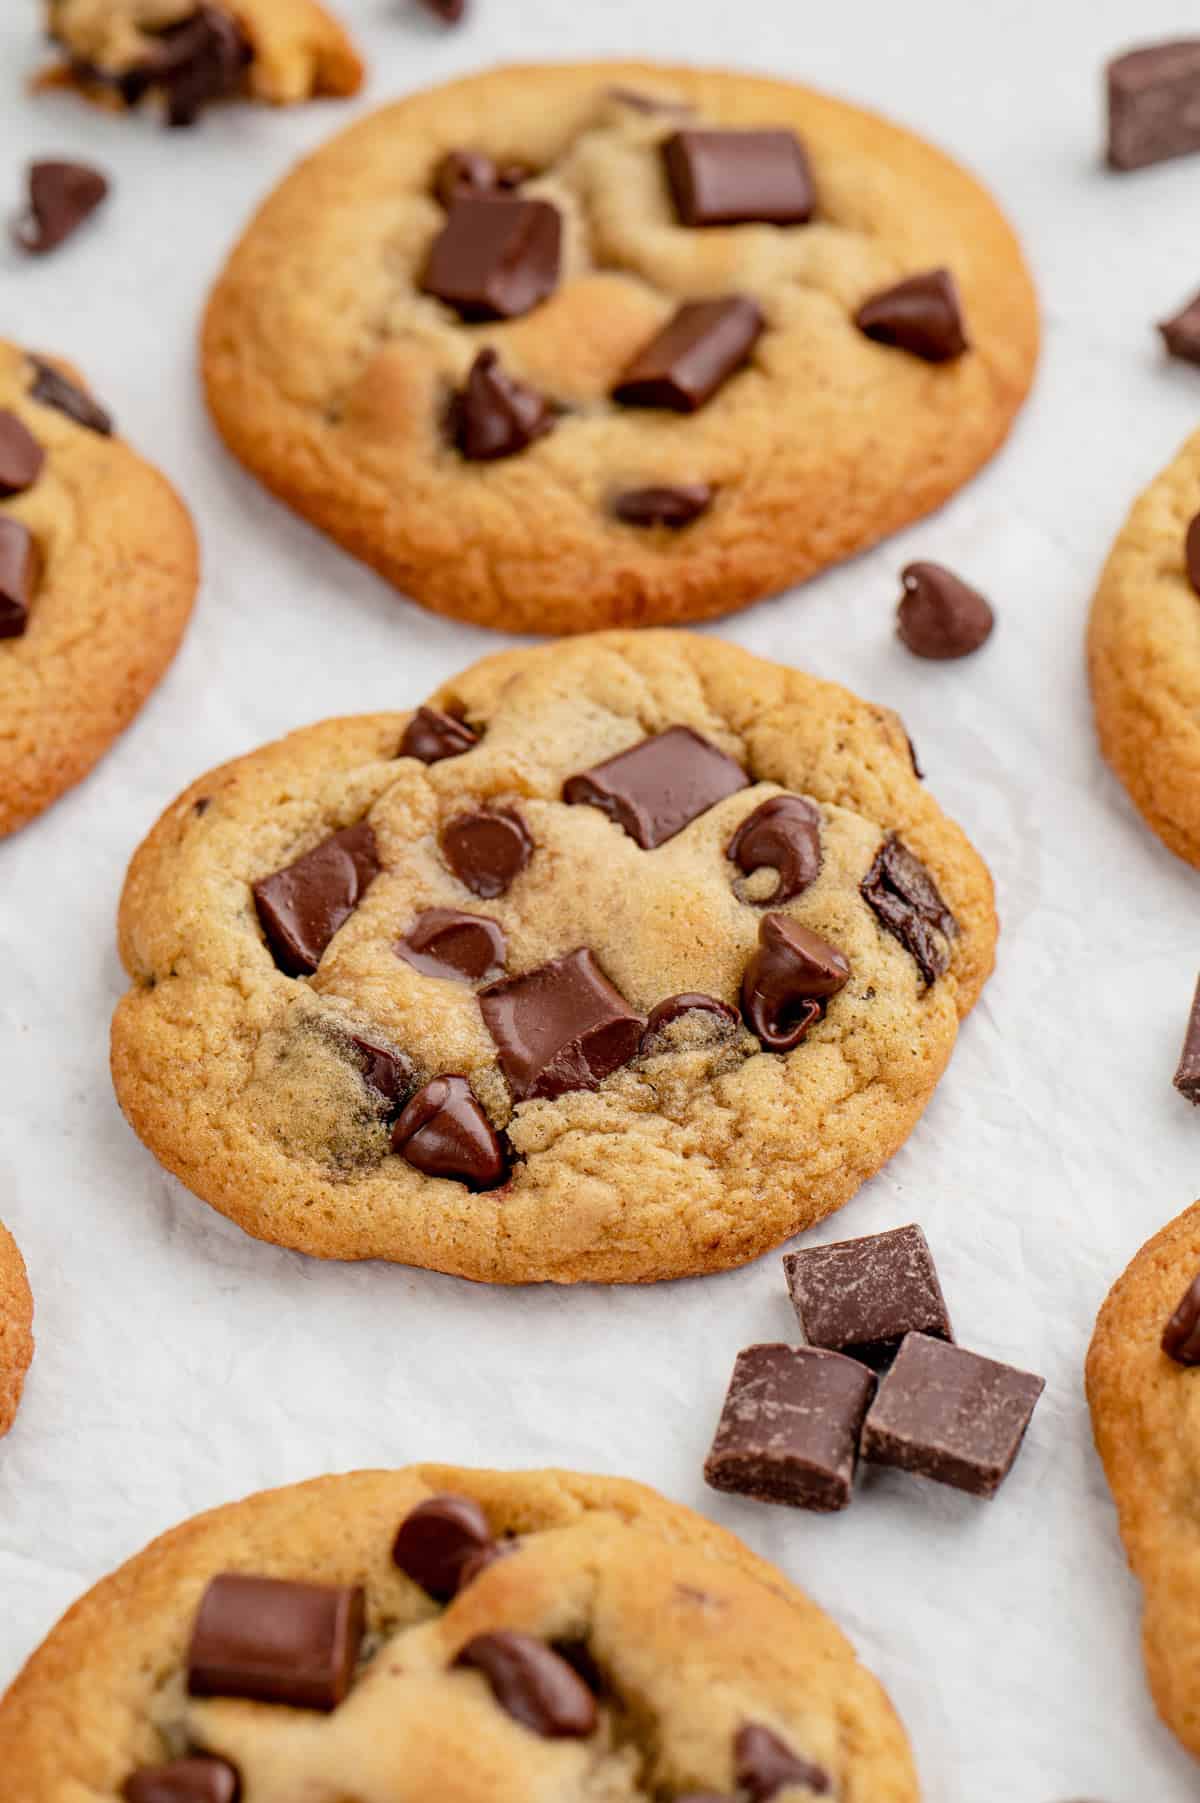 Multiple chocolate chunk cookies on a parchment sheet.